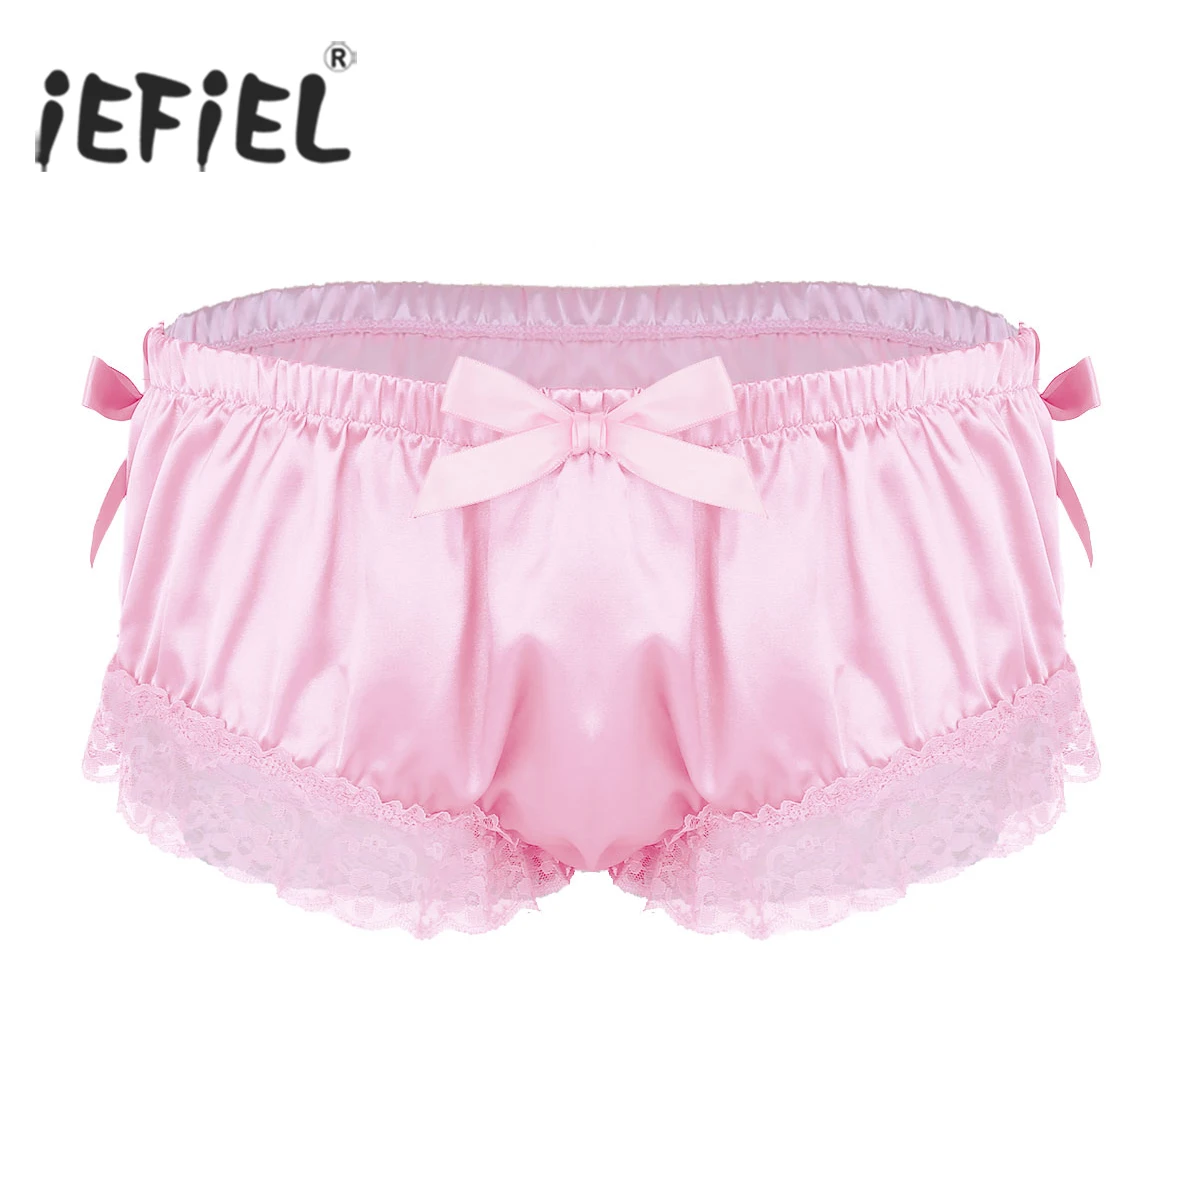 

Mens Sissy Panties Shiny Soft Satin Lingerie Ruffled Floral Lace Cute Bowknot Knickers Sexy Briefs Male Gay Underwear Underpants